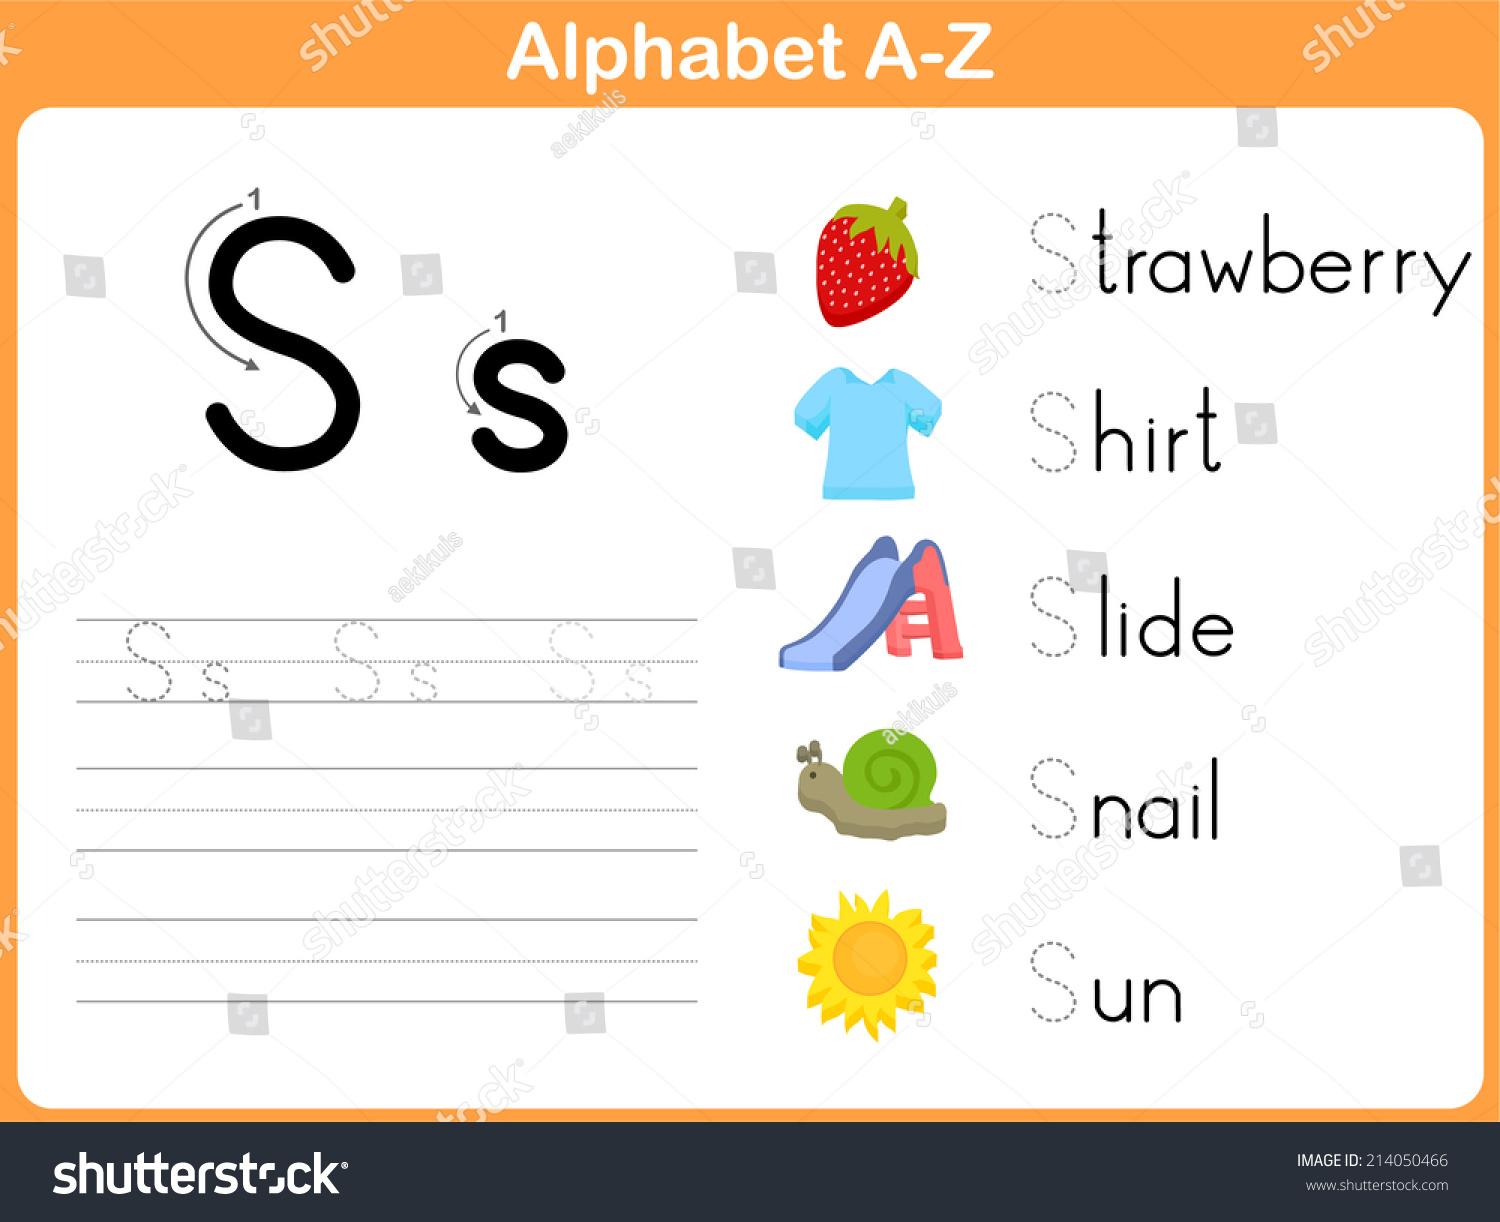 Printable Alphabet Tracing Worksheets A Z – Printable Editable  worksheets for teachers, printable worksheets, multiplication, free worksheets, and math worksheets Tracing Letters A Z Worksheet 1222 x 1500